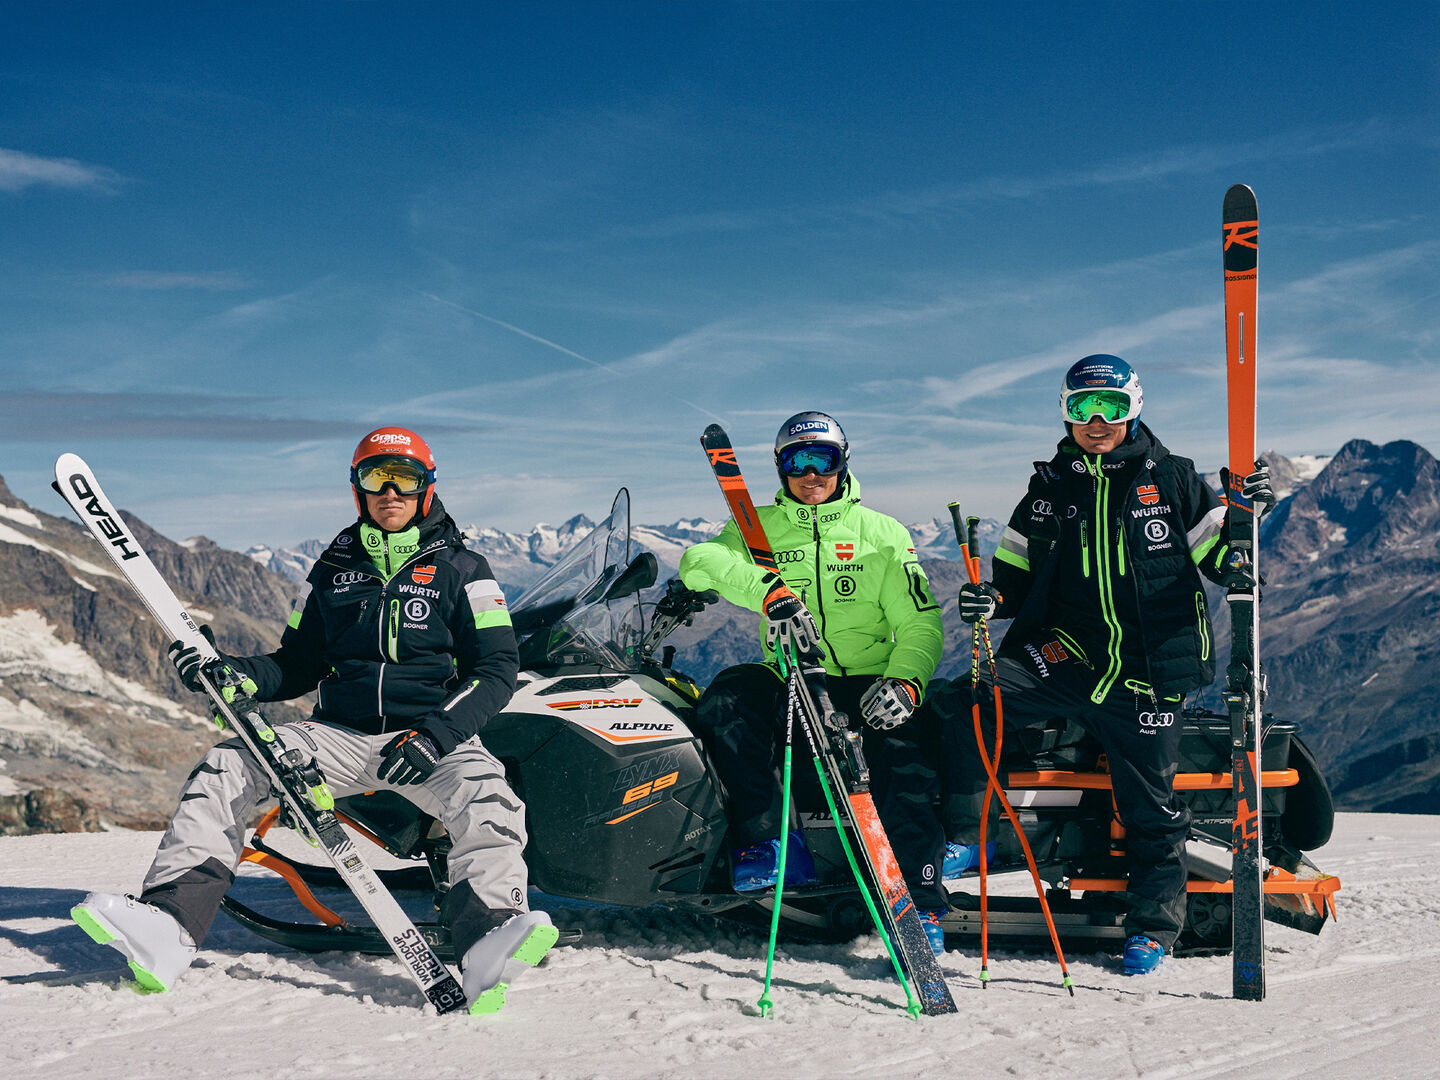 News | BOGNER Years 70 for Team and Almost – Ski Association German Perfect the a